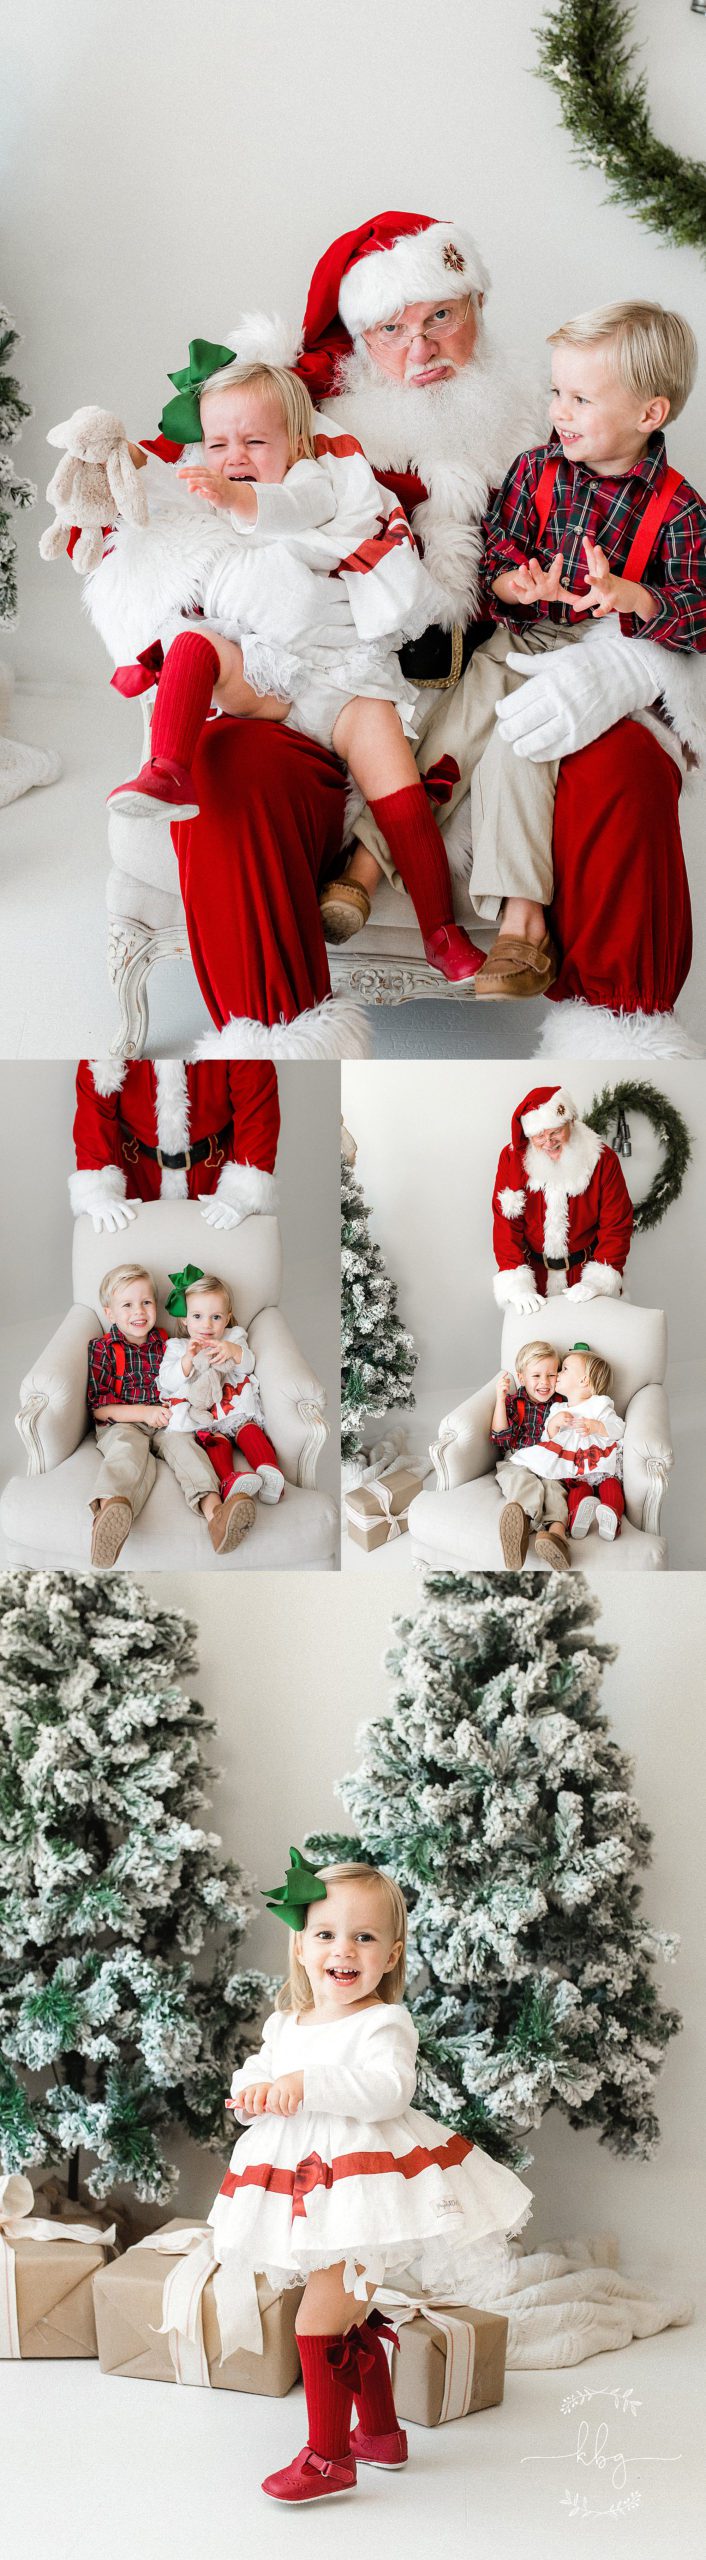 siblings sitting on santa's lap and crying - marietta family photographer santa sessions